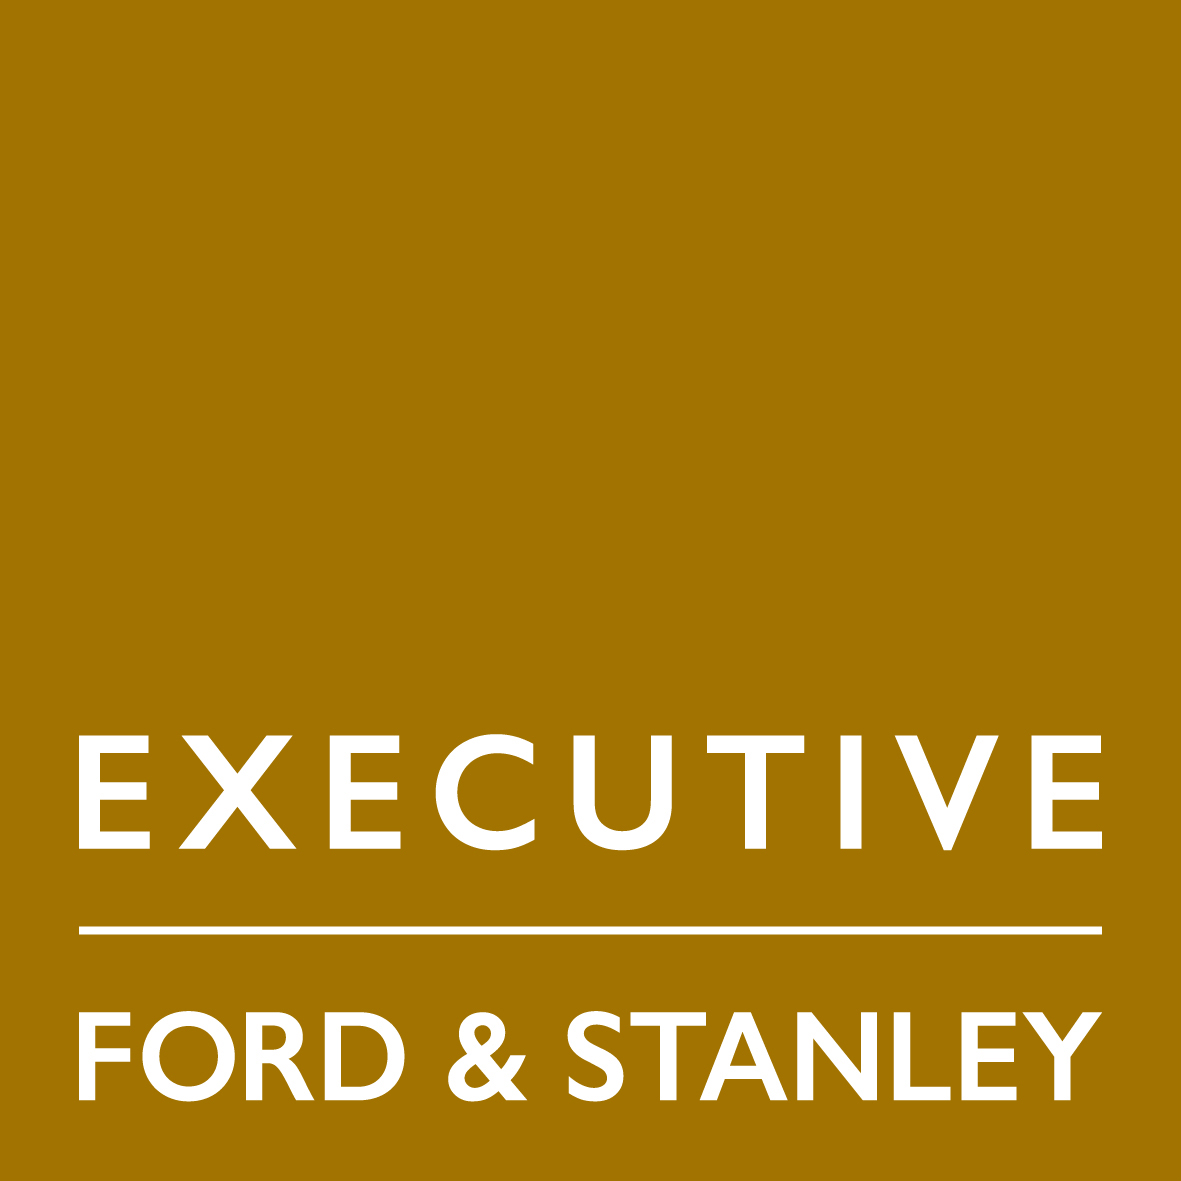 Ford & Stanley Executive